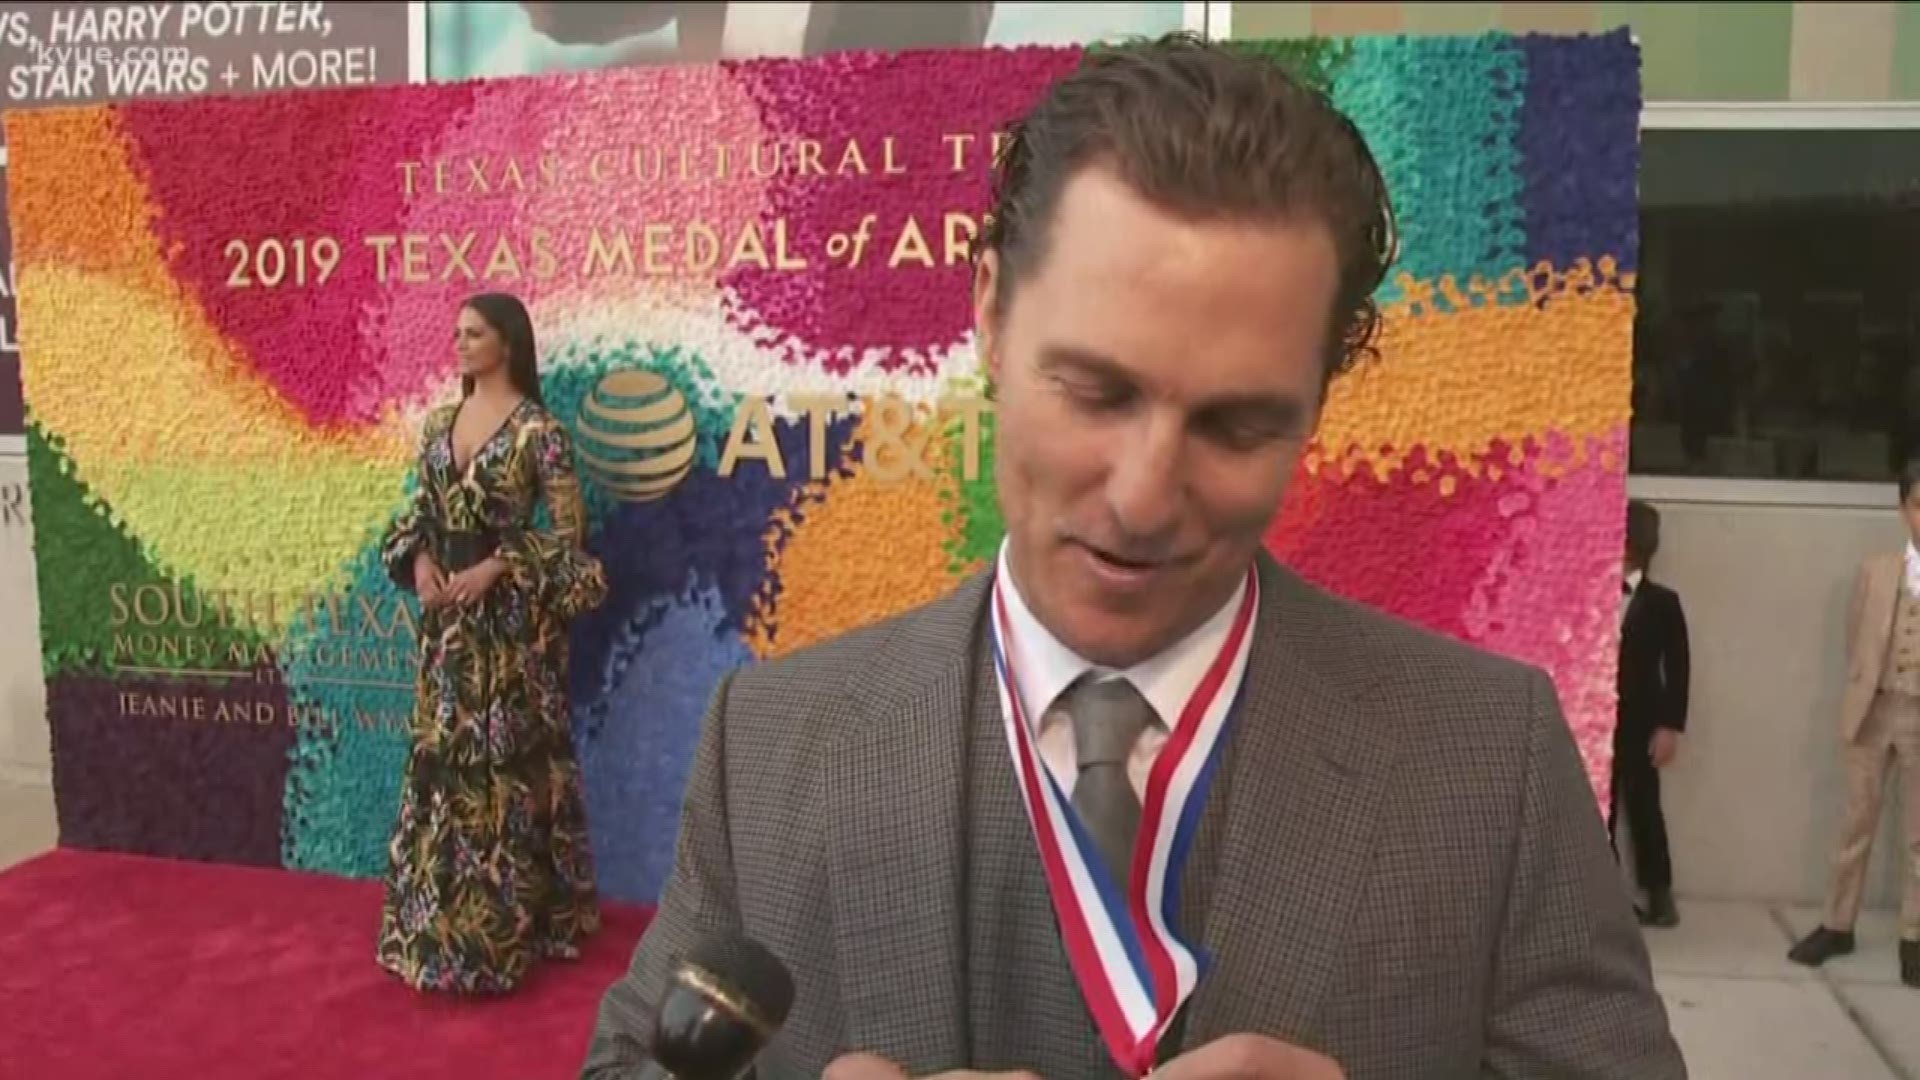 World-famous Texans were recognized at the 10th Biennial Texas Medal of Arts Awards. Kris Betts asked the honorees what they love about Texas and what the highlight of their career has been.